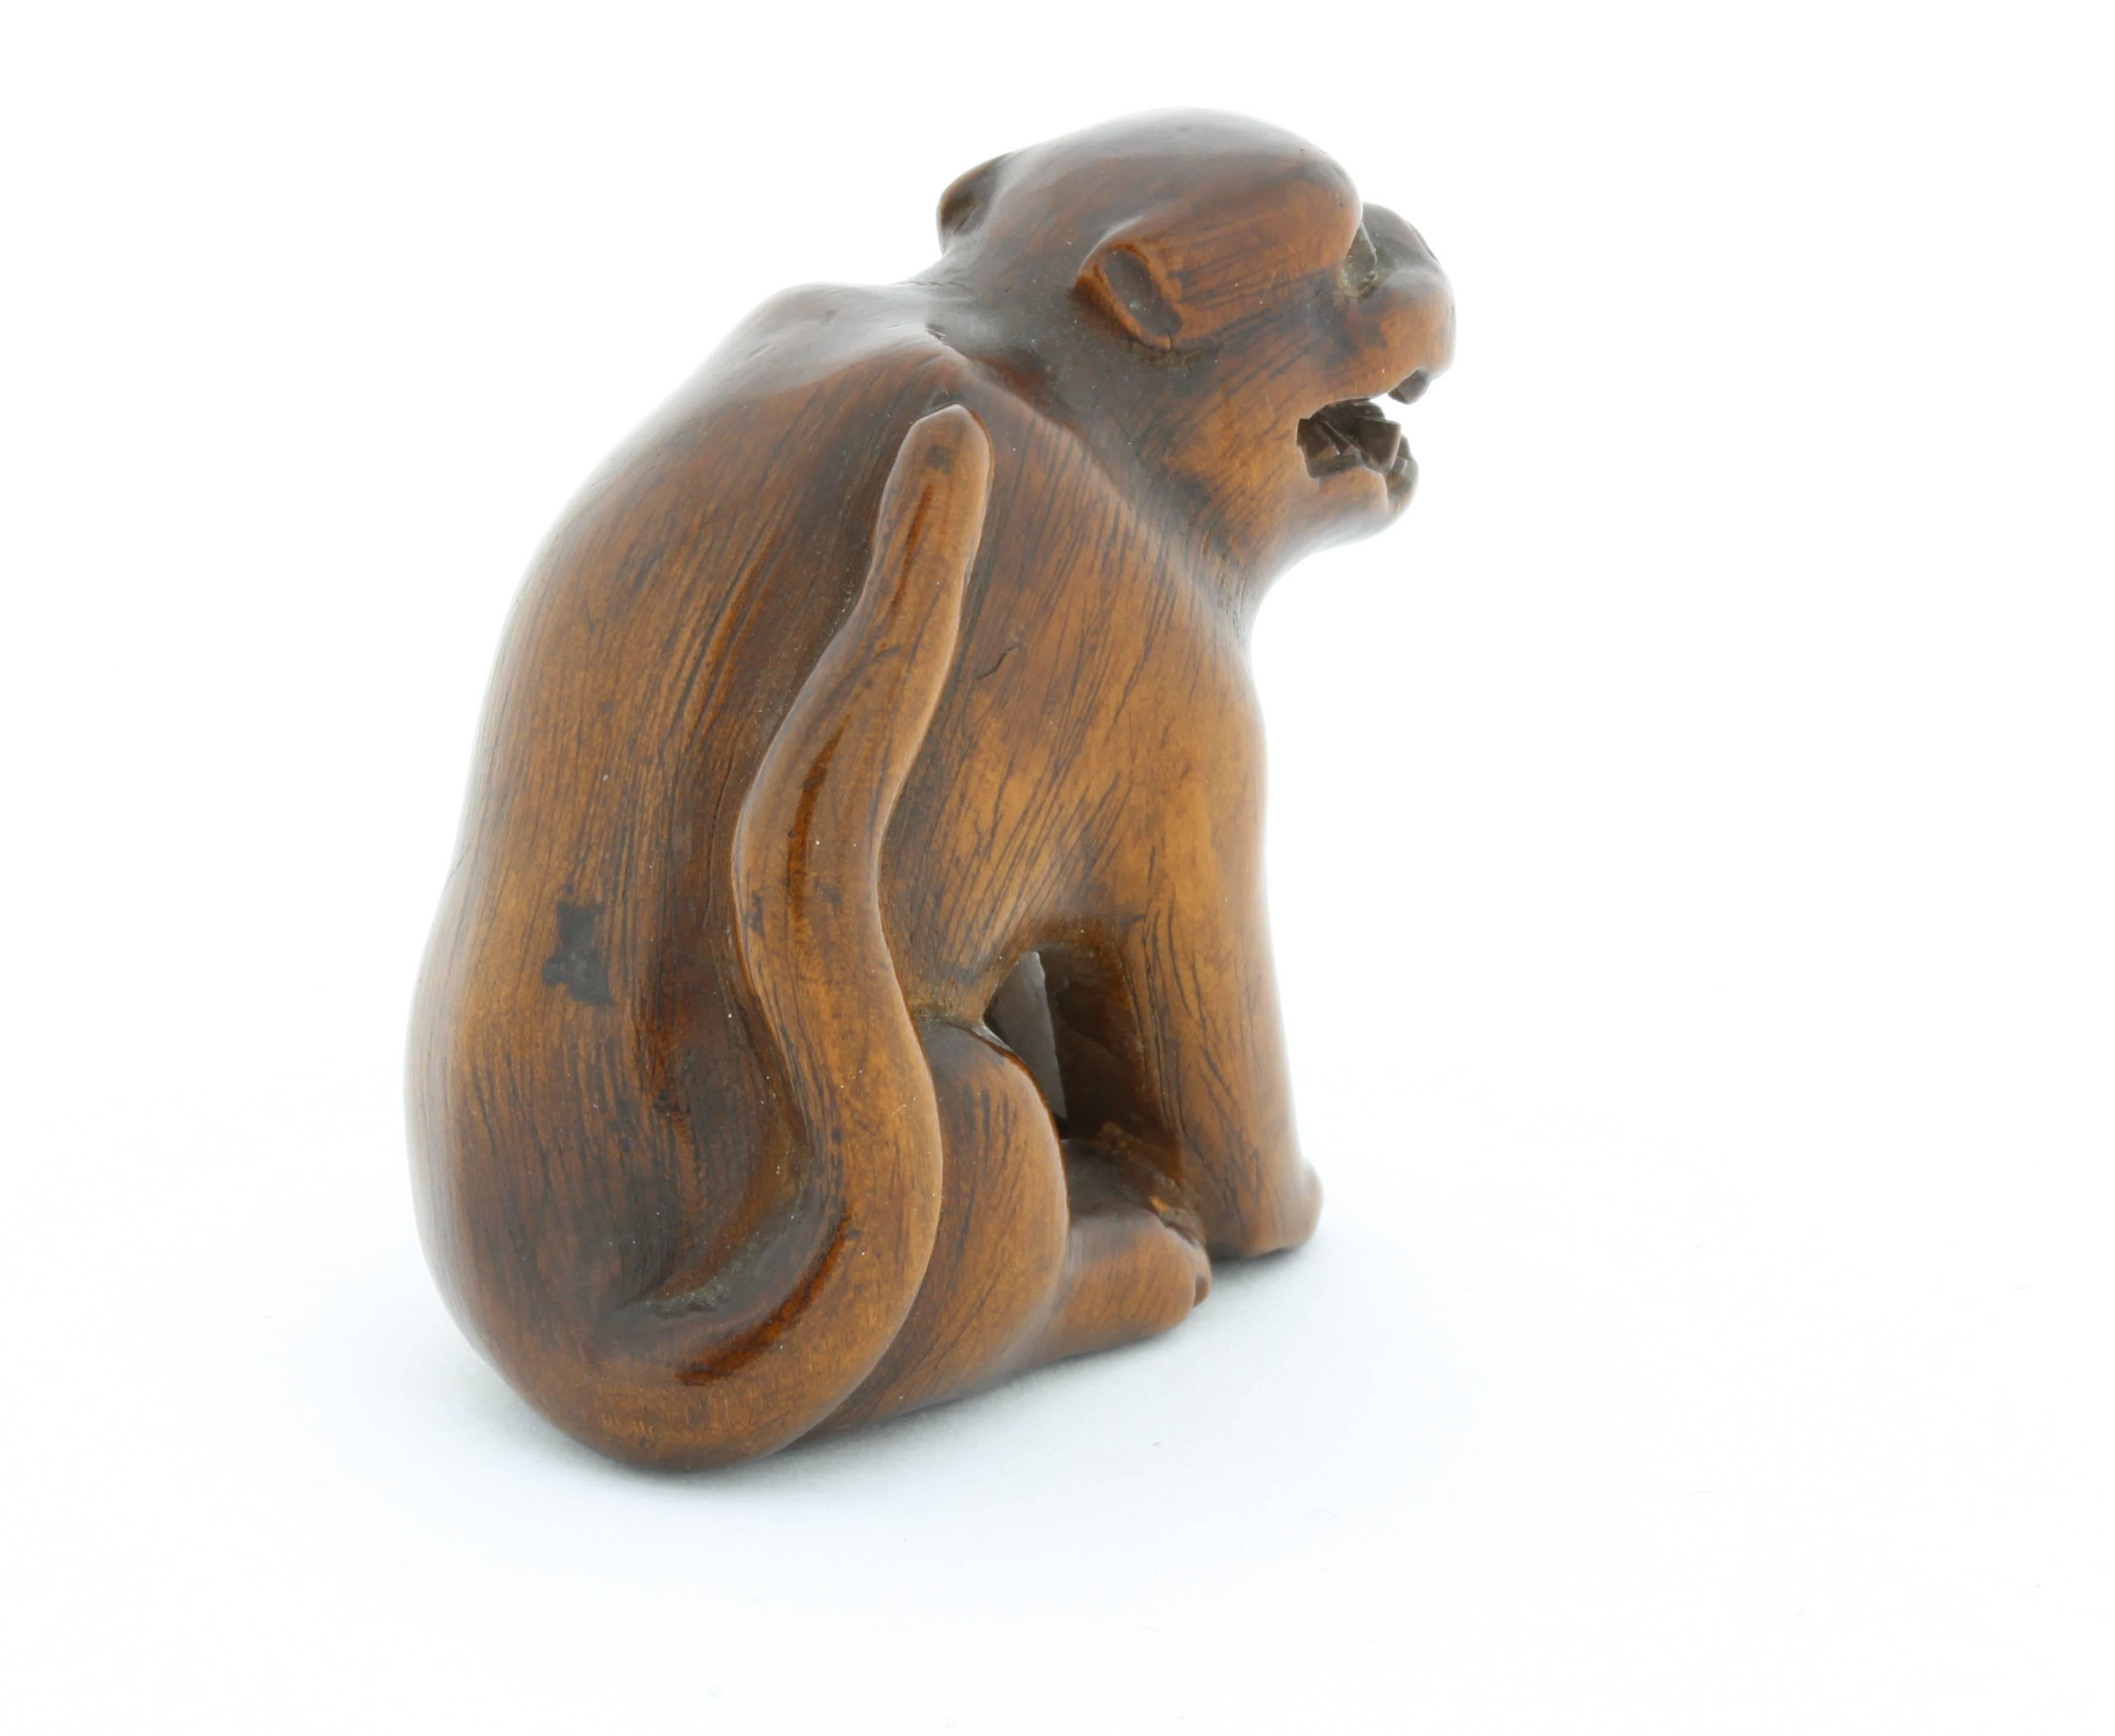 This growling dog netsuke is made entirely out of wood, with glass eyes. As glass was a rare material in 19th century Japan, it can be assumed they are a later addition, perhaps as part of a restoration. In Japanese culture, the dog is the eleventh